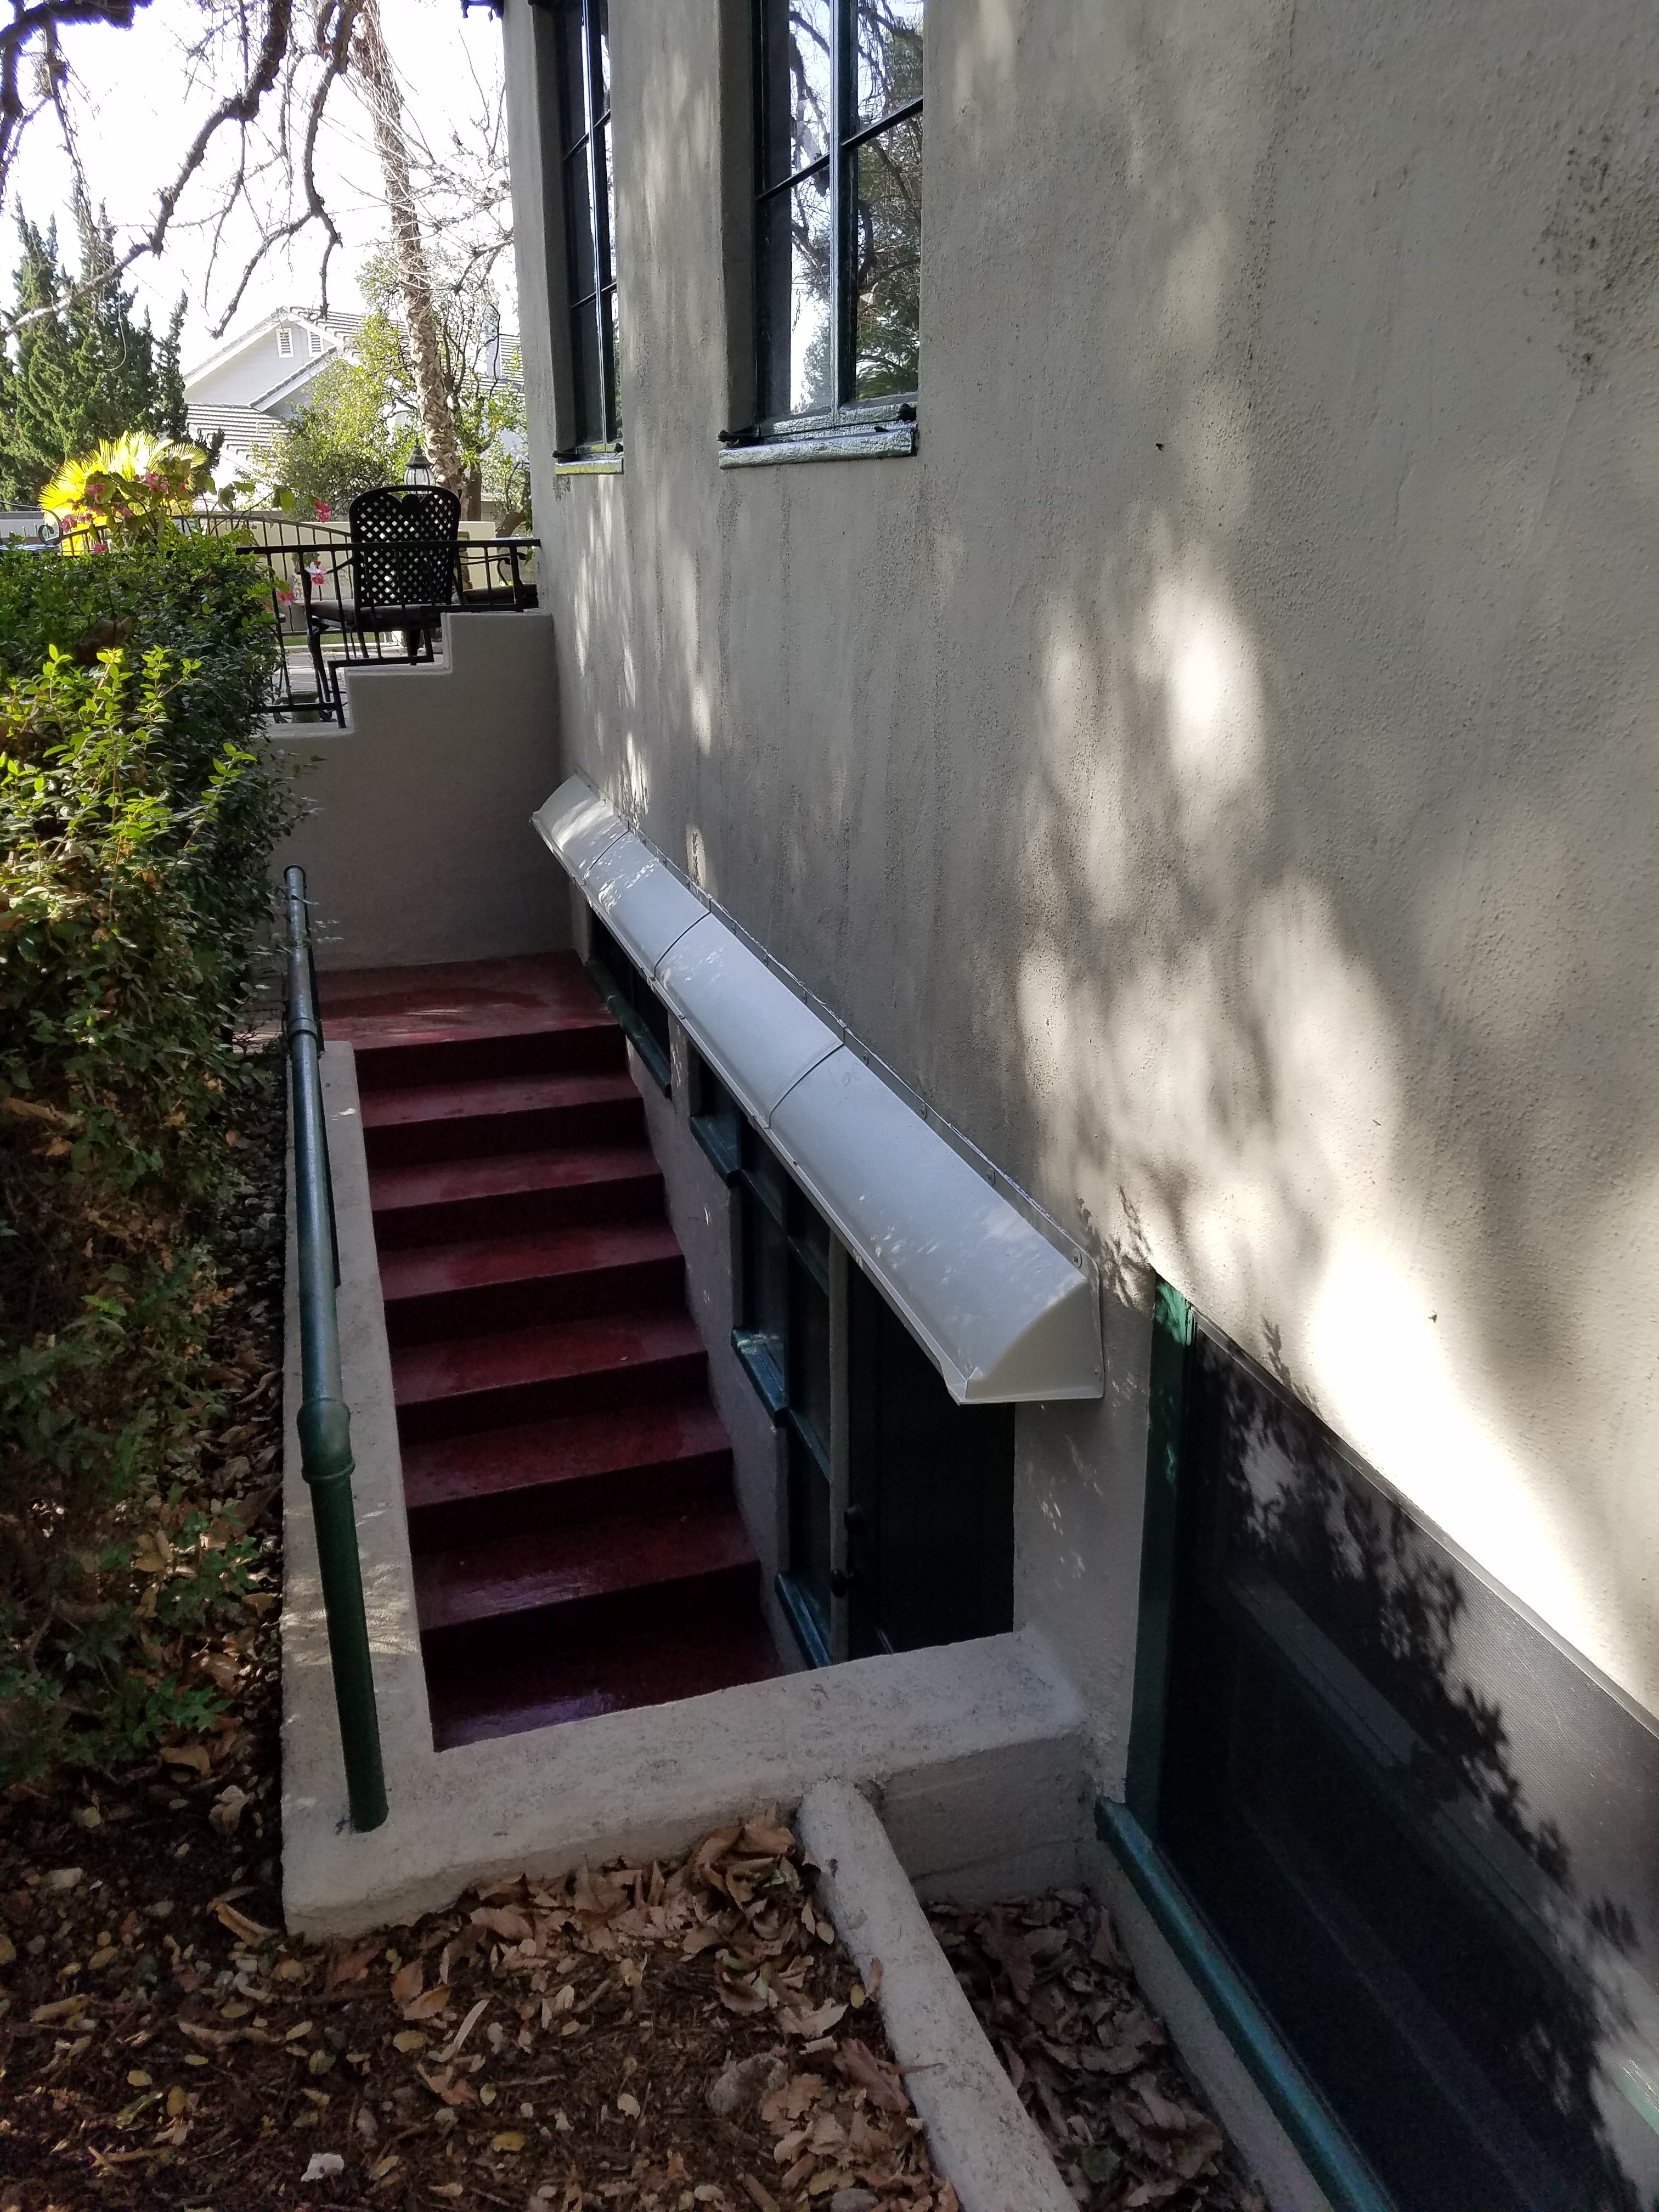 STAIRS LEADING DOWN TO LONG GRAY RAIN DIVERTER MOUNTED OVER BASEMENT WINDOW ASSEMBLY.